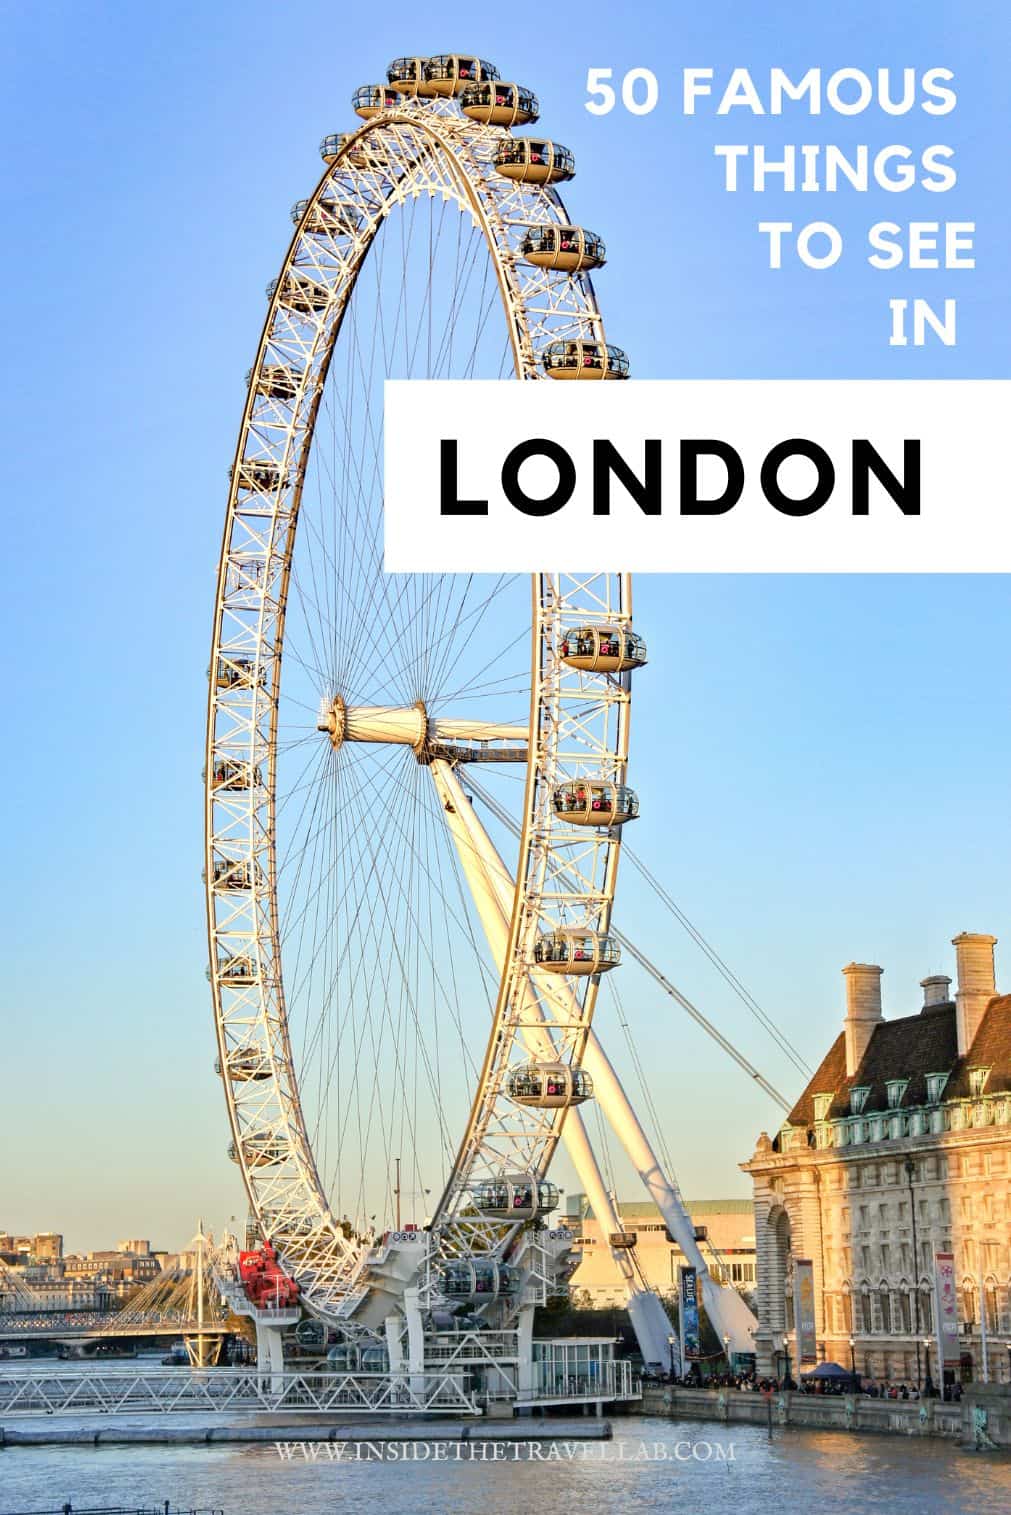 Cover image for famous things to see in London